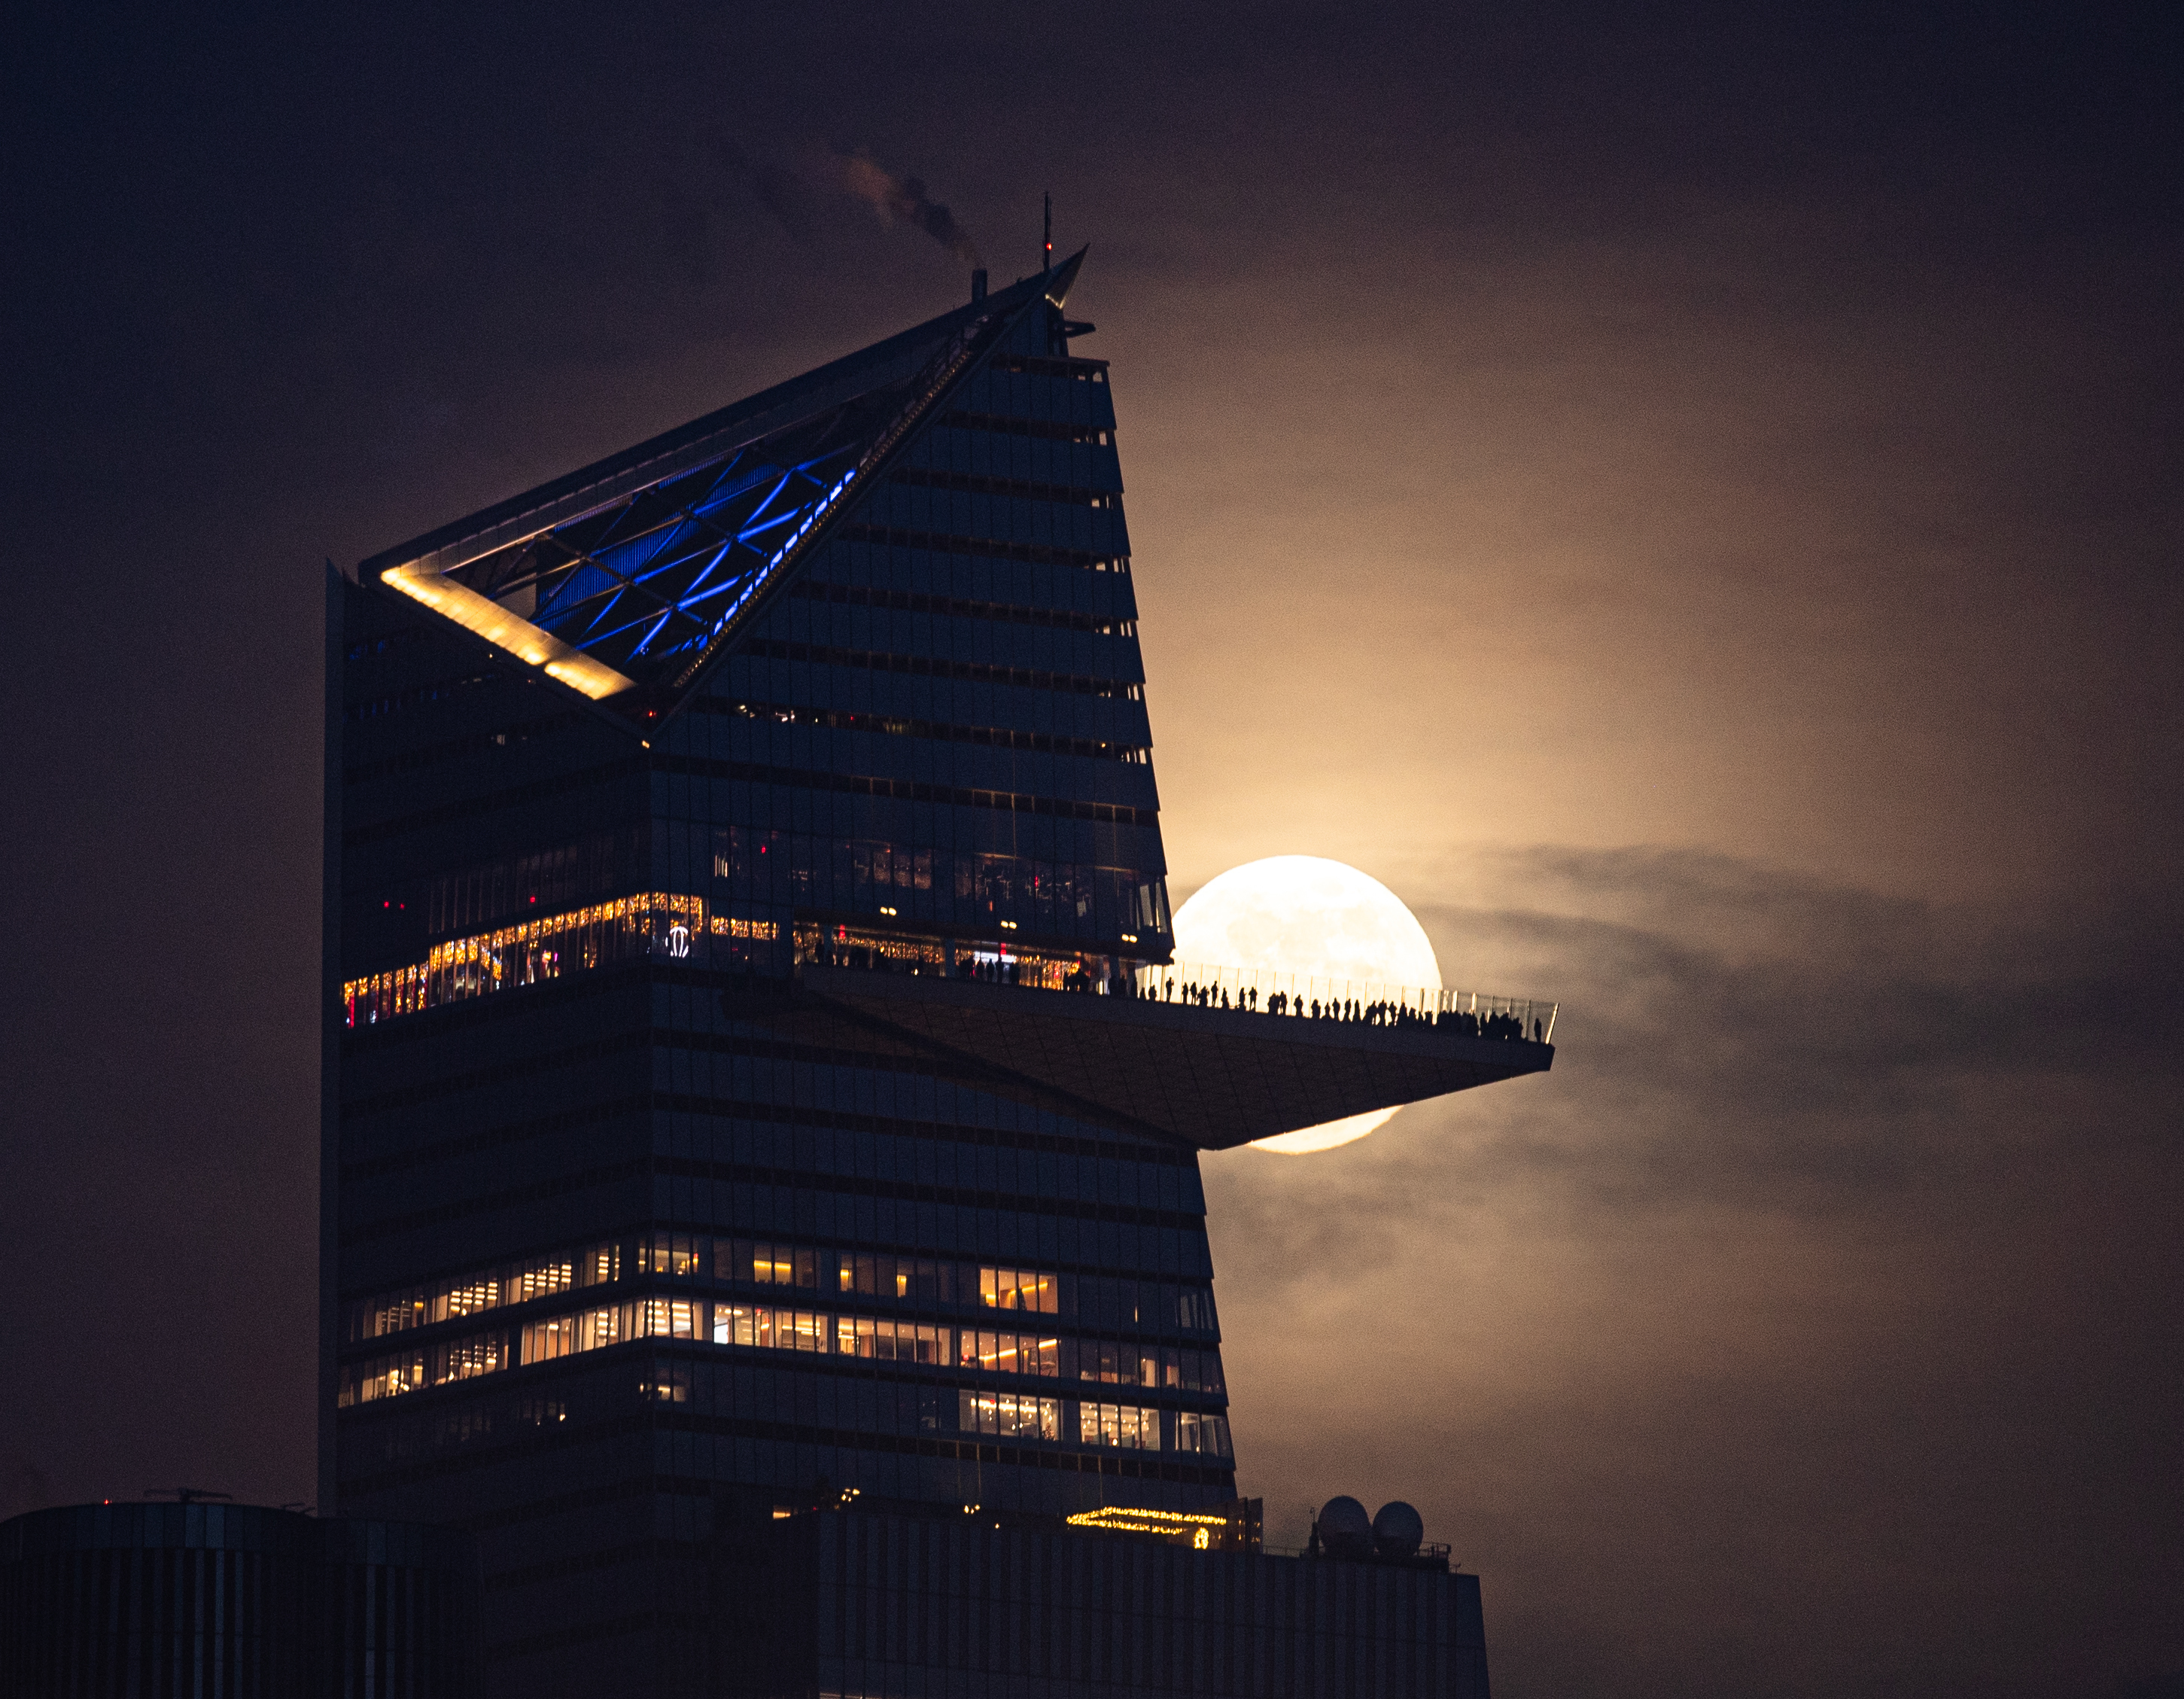 Moon behind the crest of a tall building